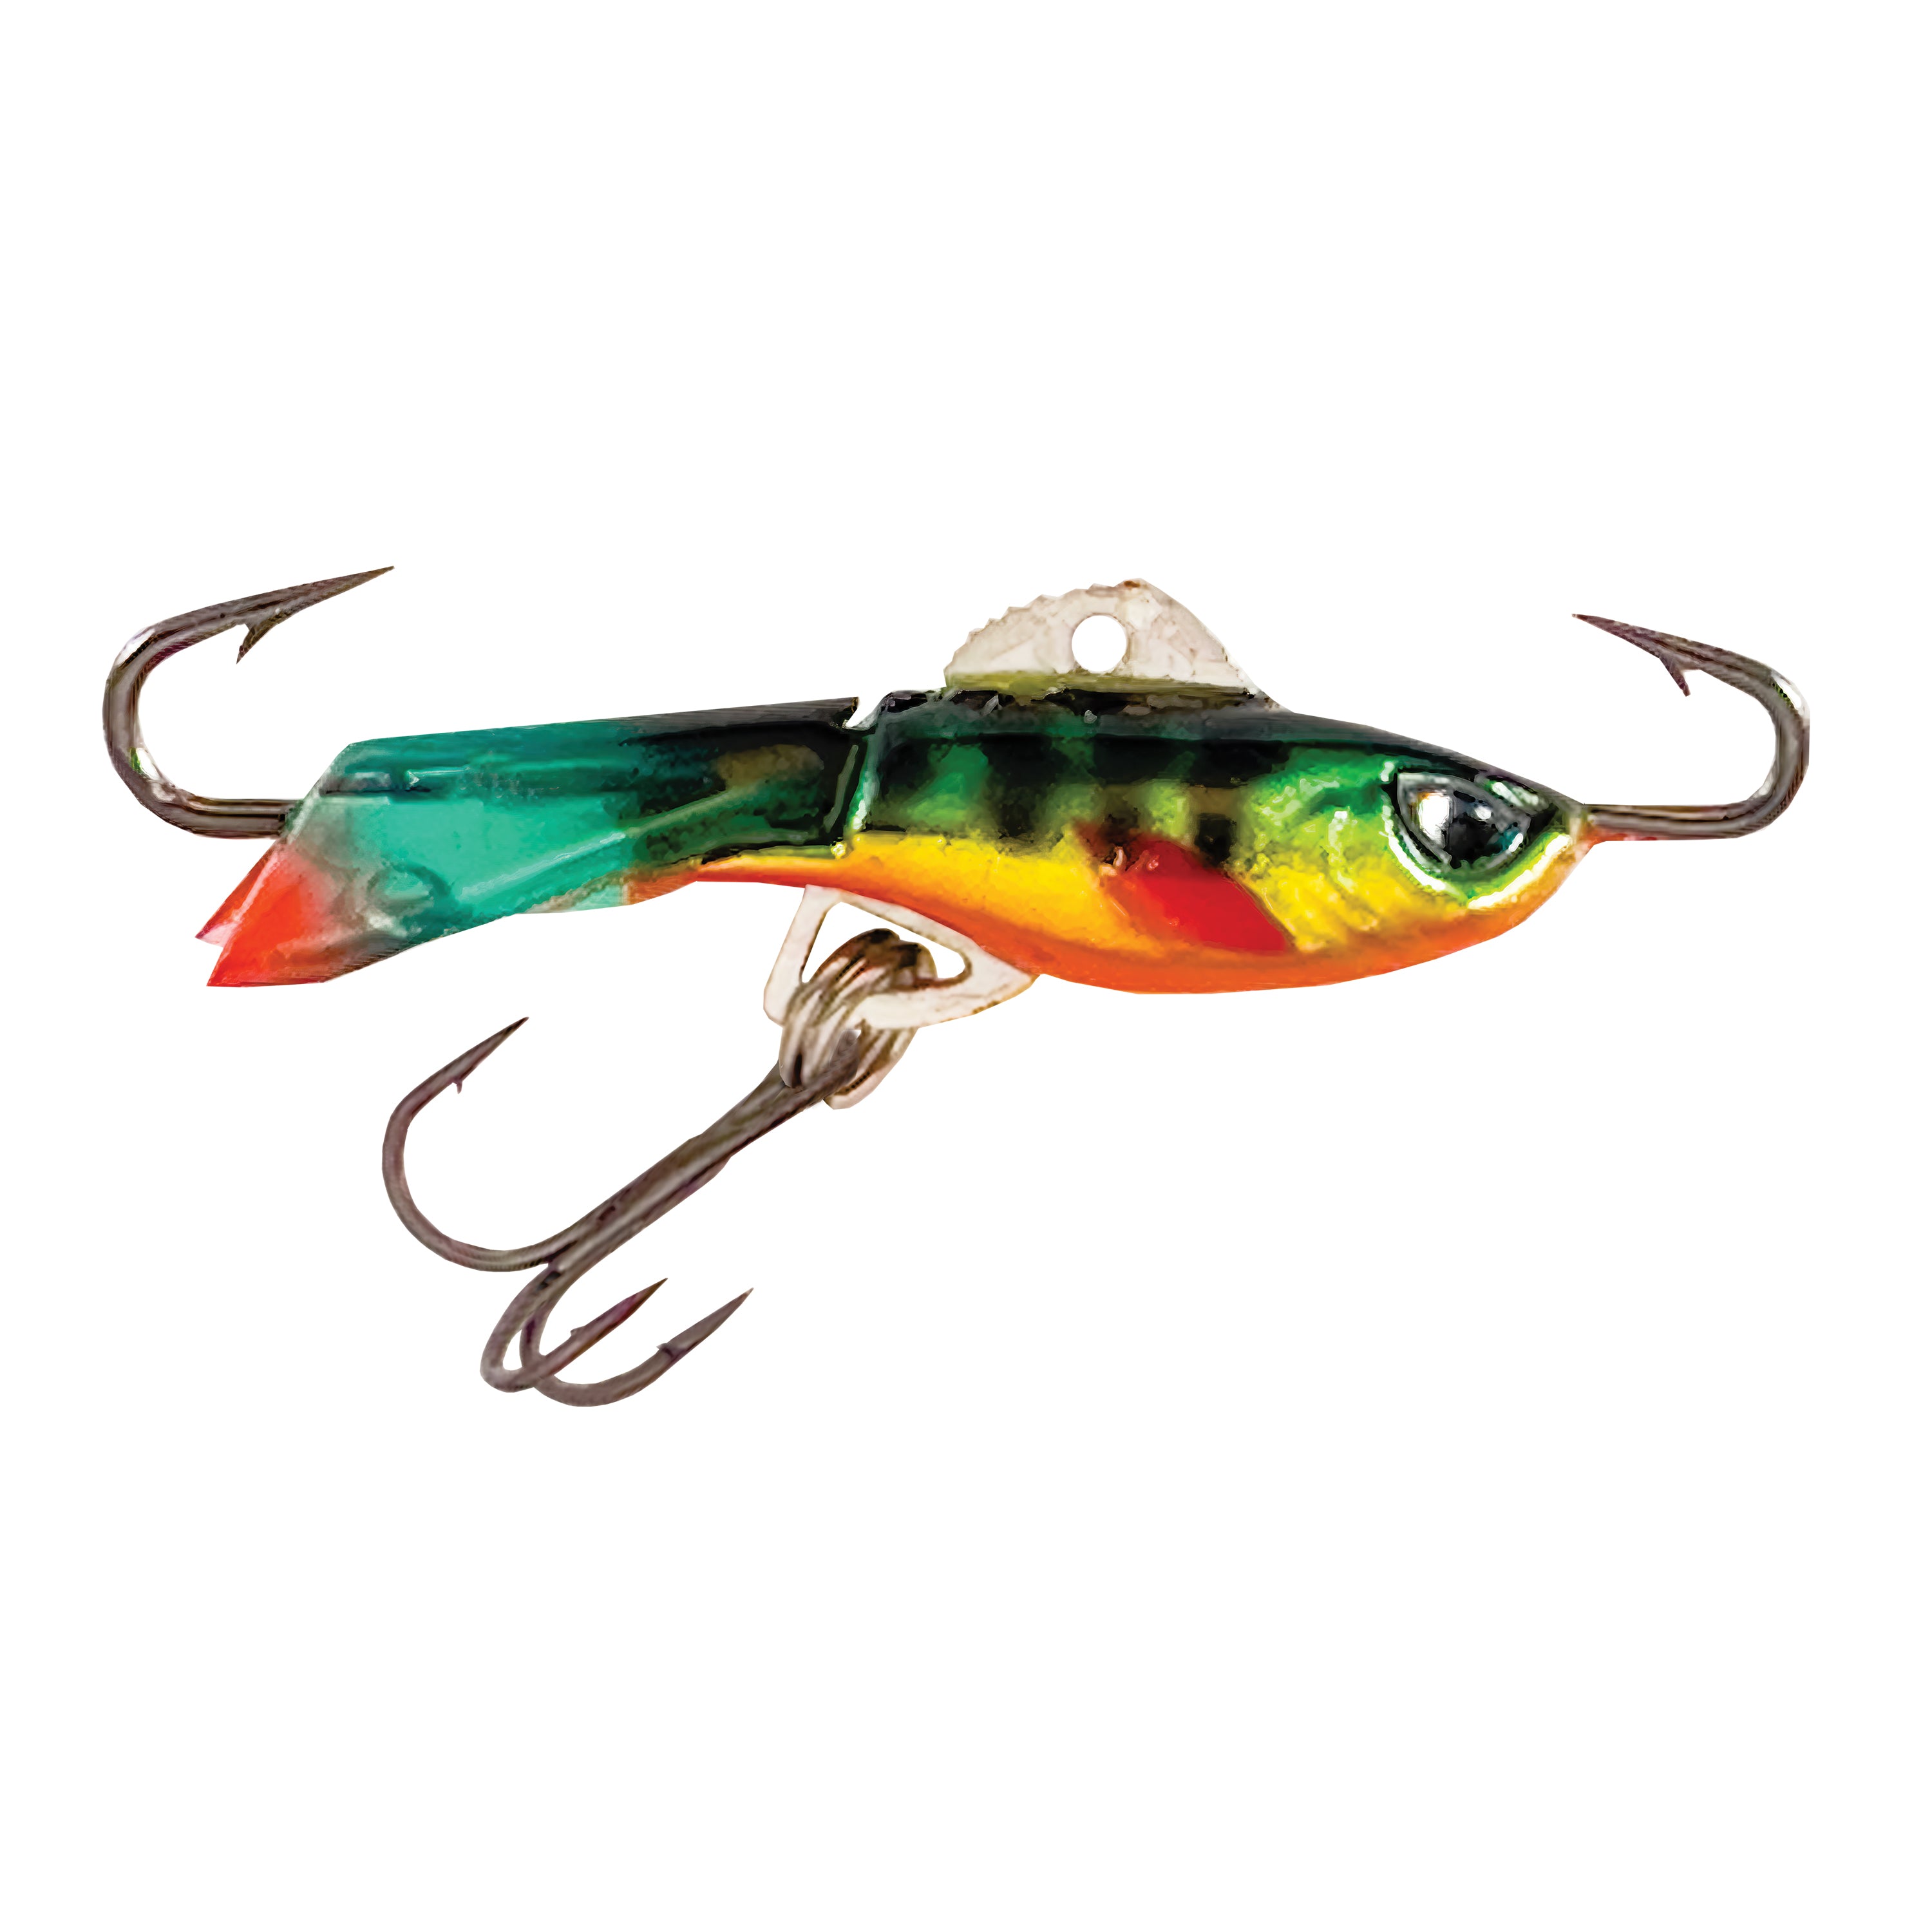 Acme Tackle Hyper Rattle 1 inch Perch